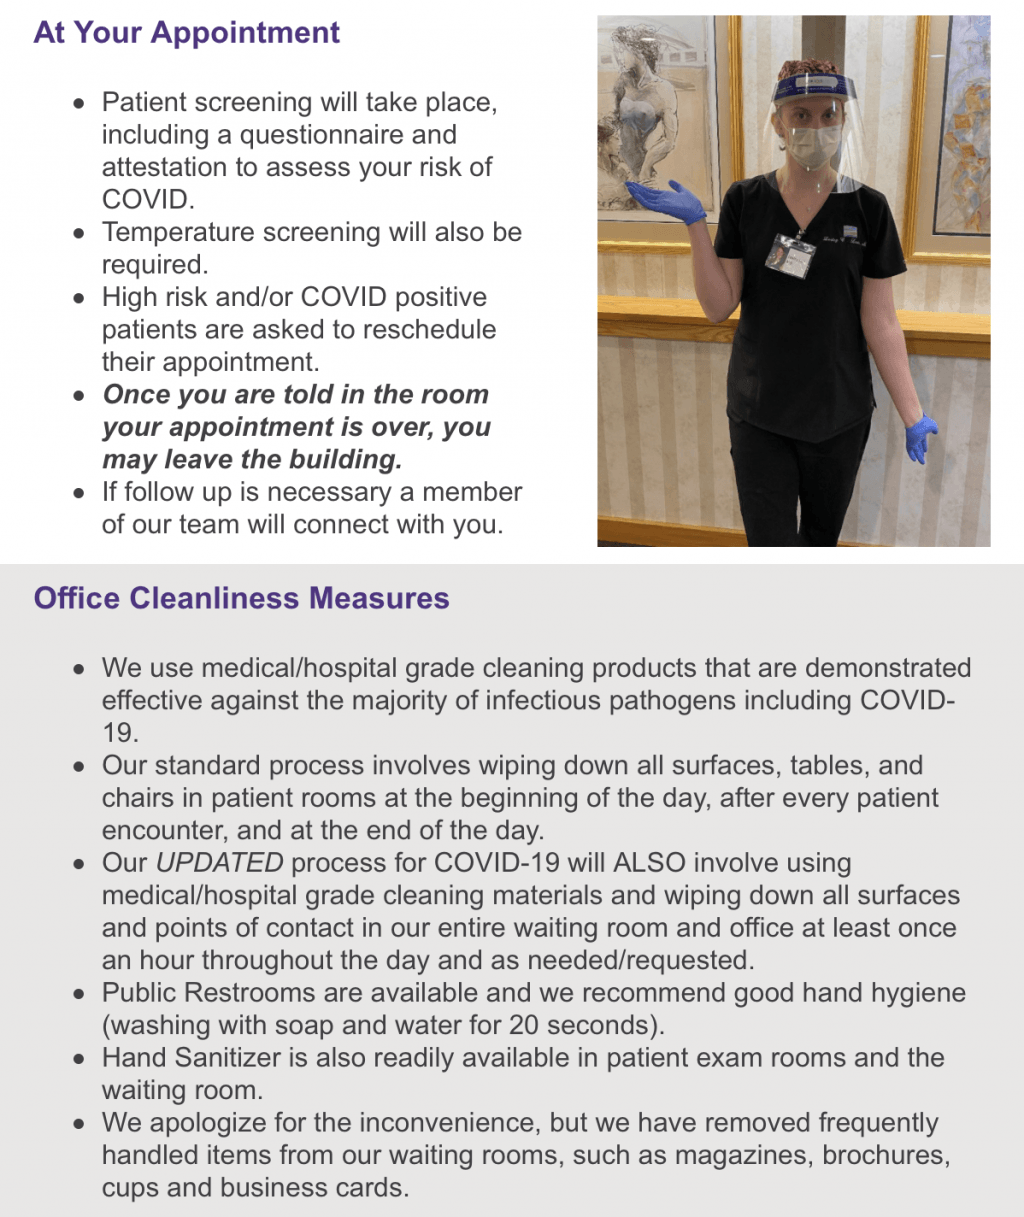 COVID 19 Appointment Procedure and Cleanliness Measures